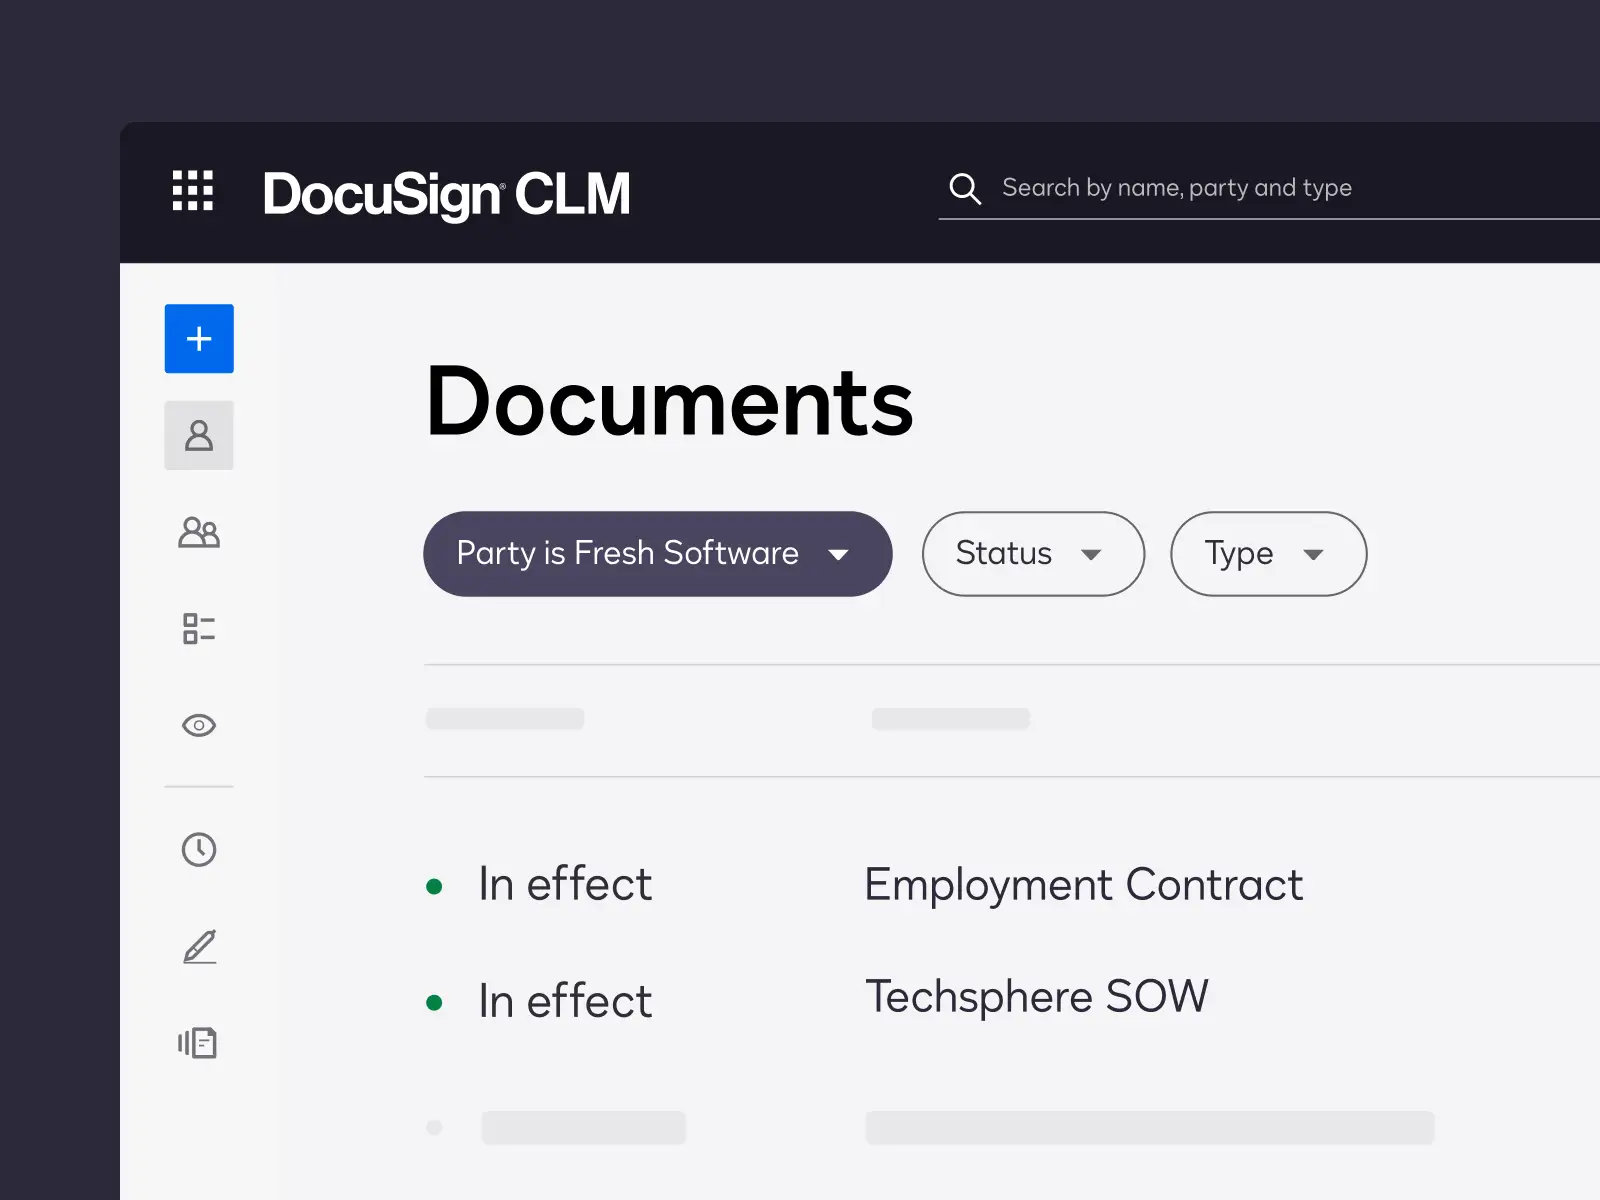 CLM product image showing all contracts and centralized location.